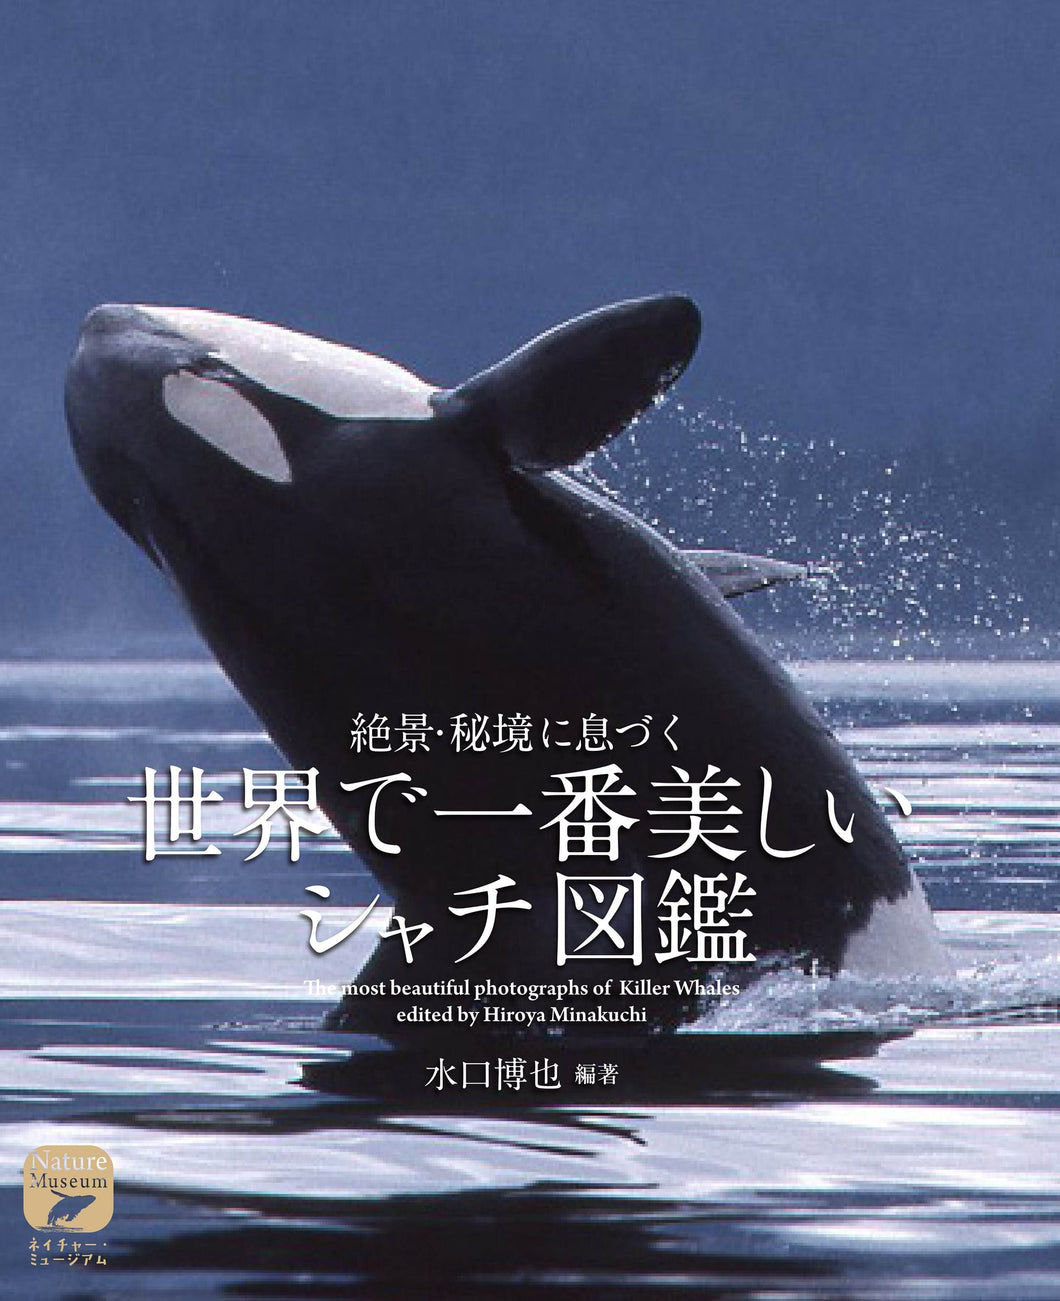 The world's most beautiful killer whale encyclopedia